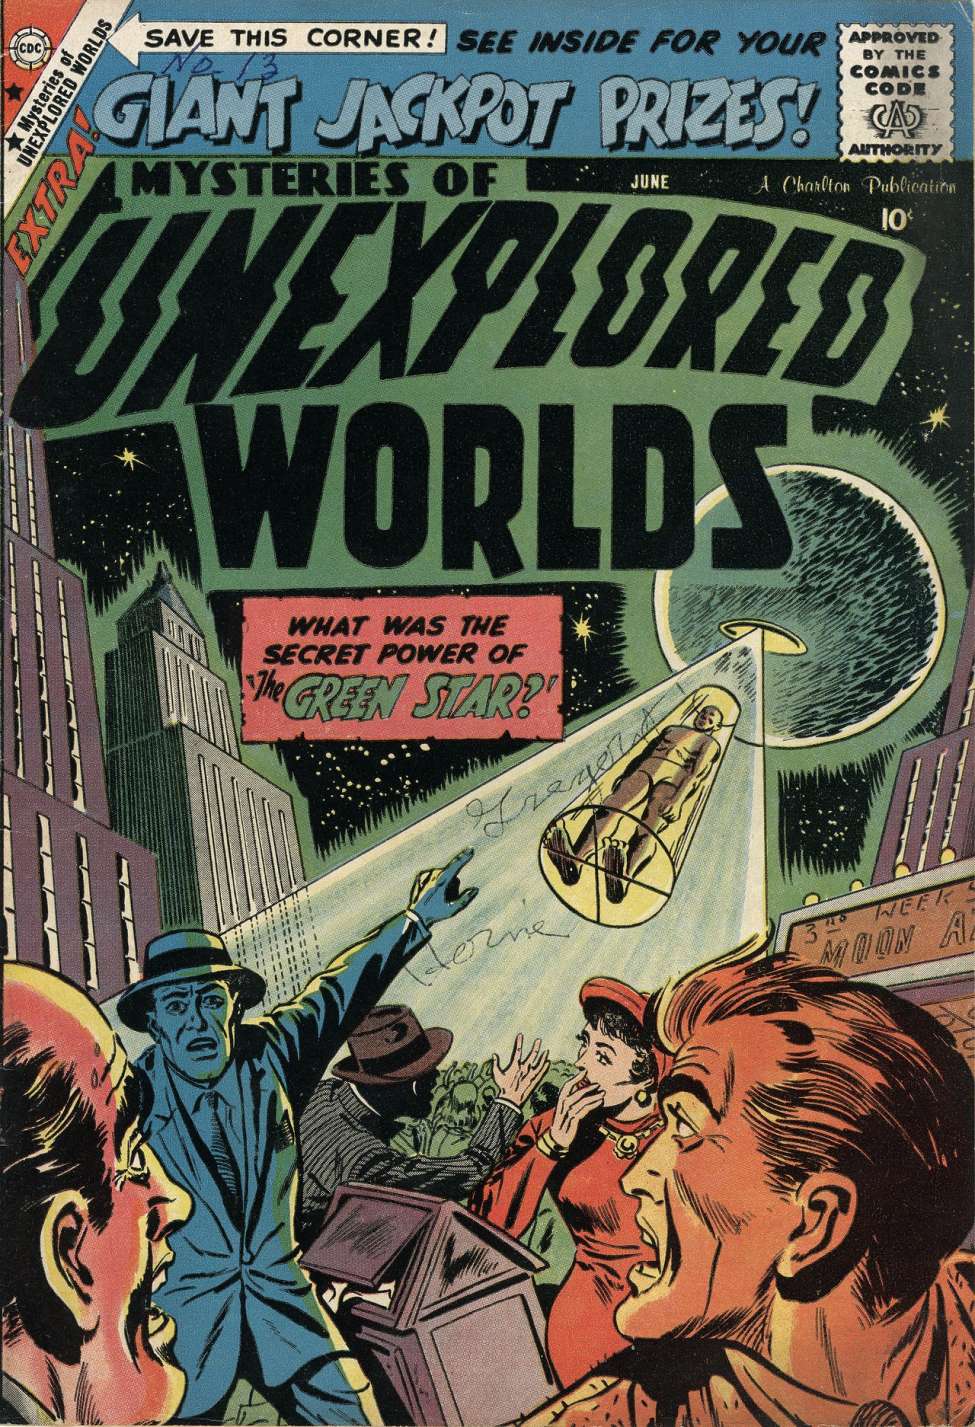 Comic Book Cover For Mysteries of Unexplored Worlds 13